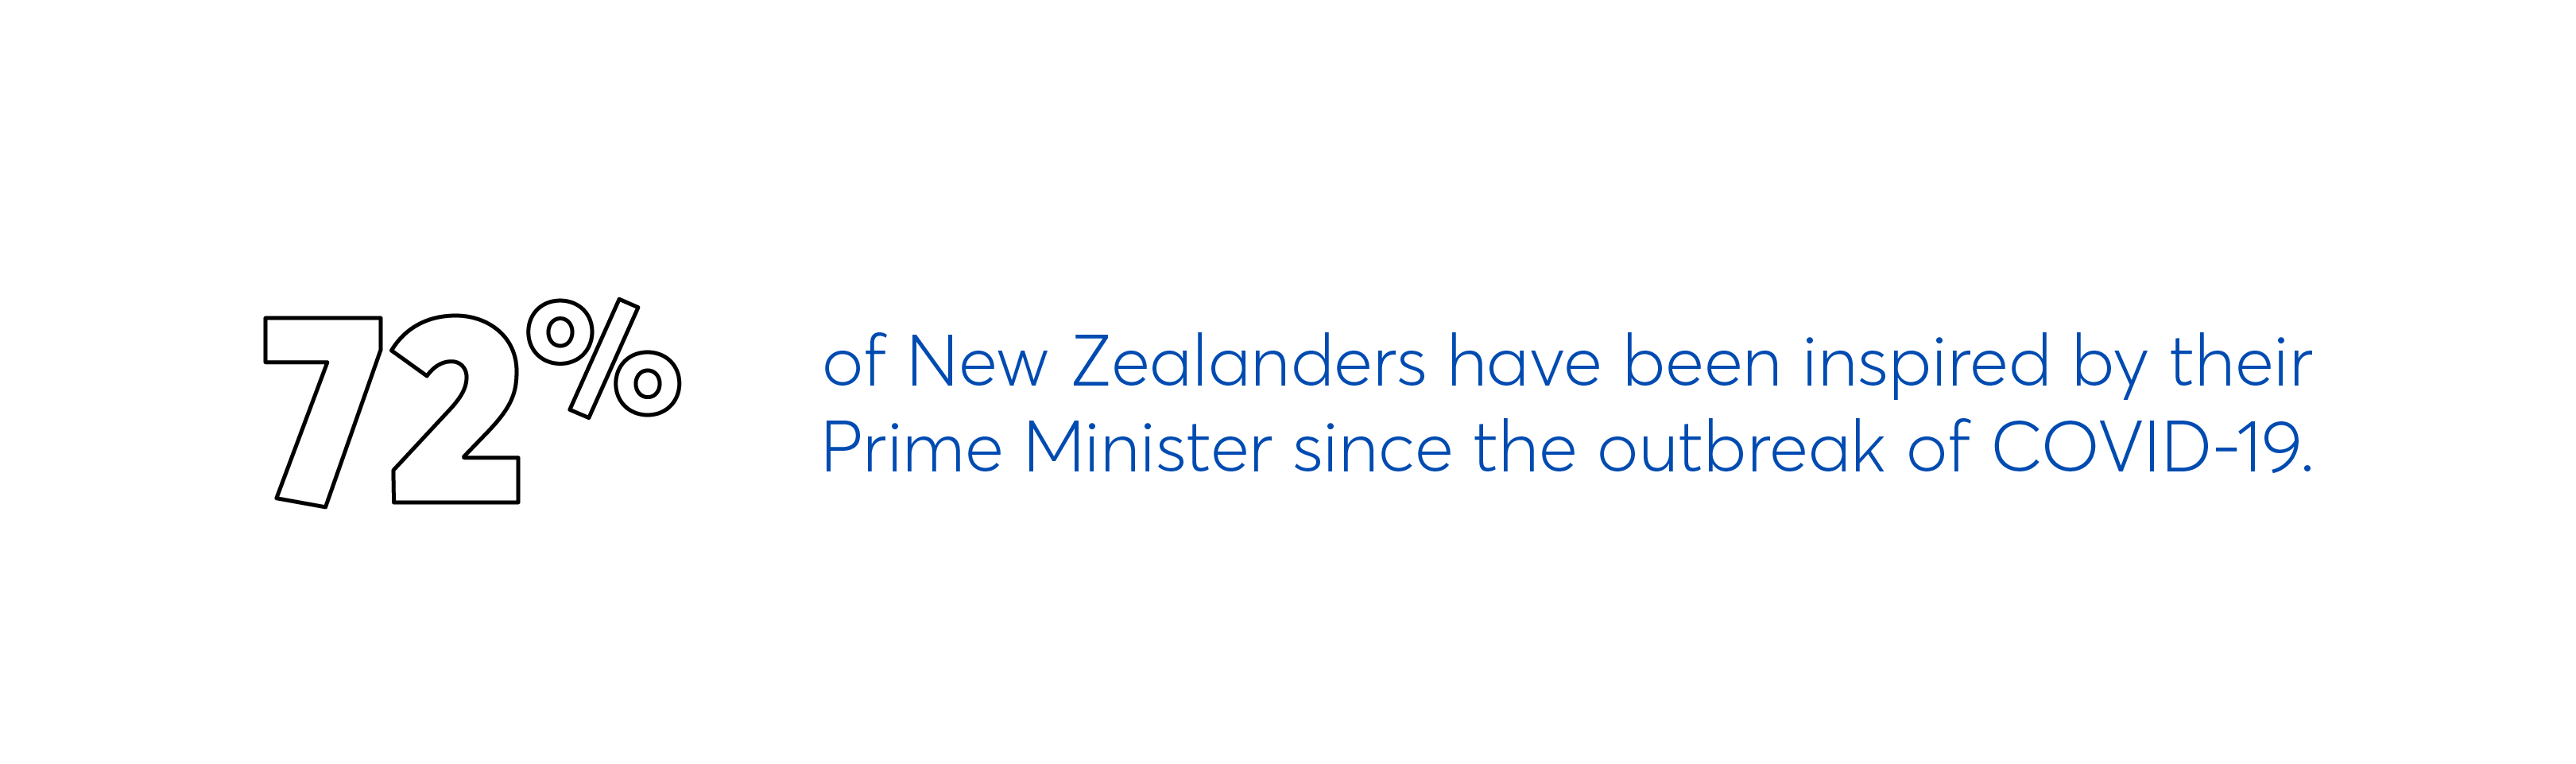 New Zealanders have been inspired by their leaders